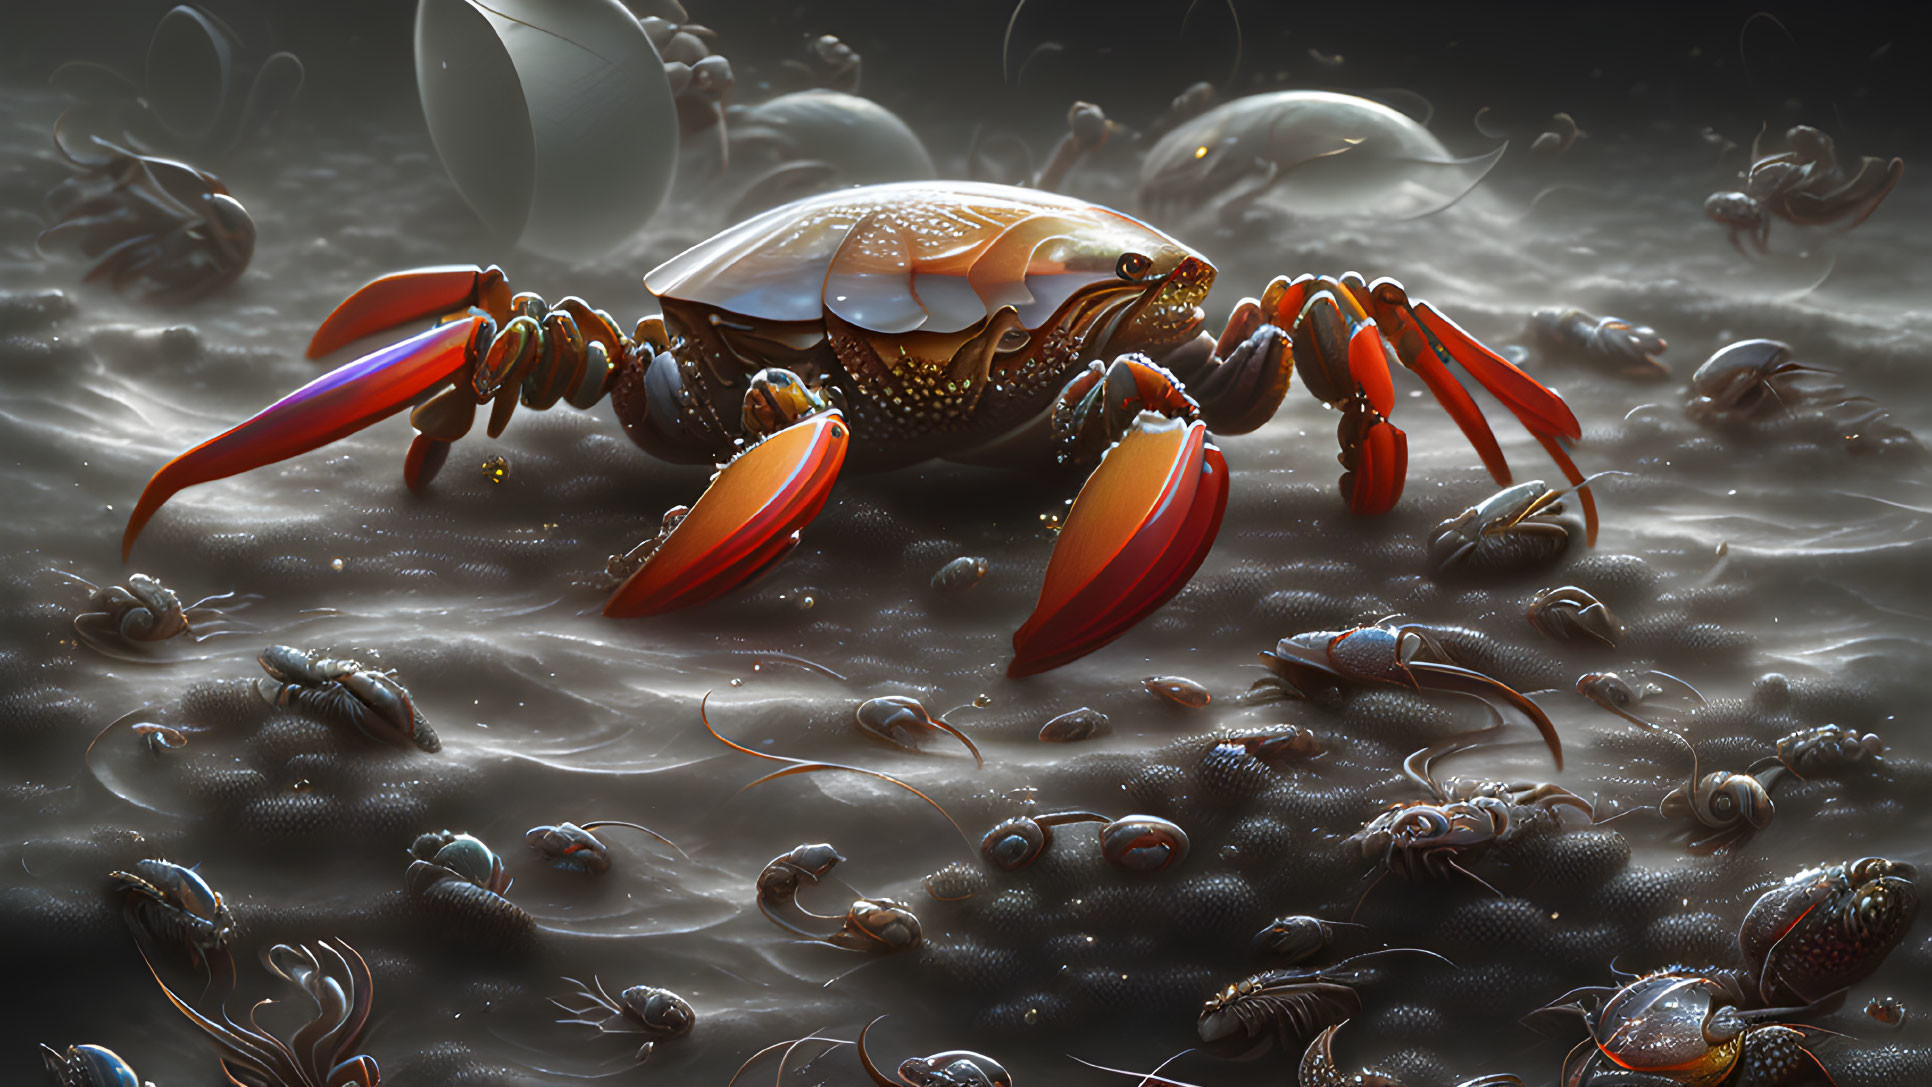 Stylized crab digital artwork with red-orange limbs on dimly lit surface